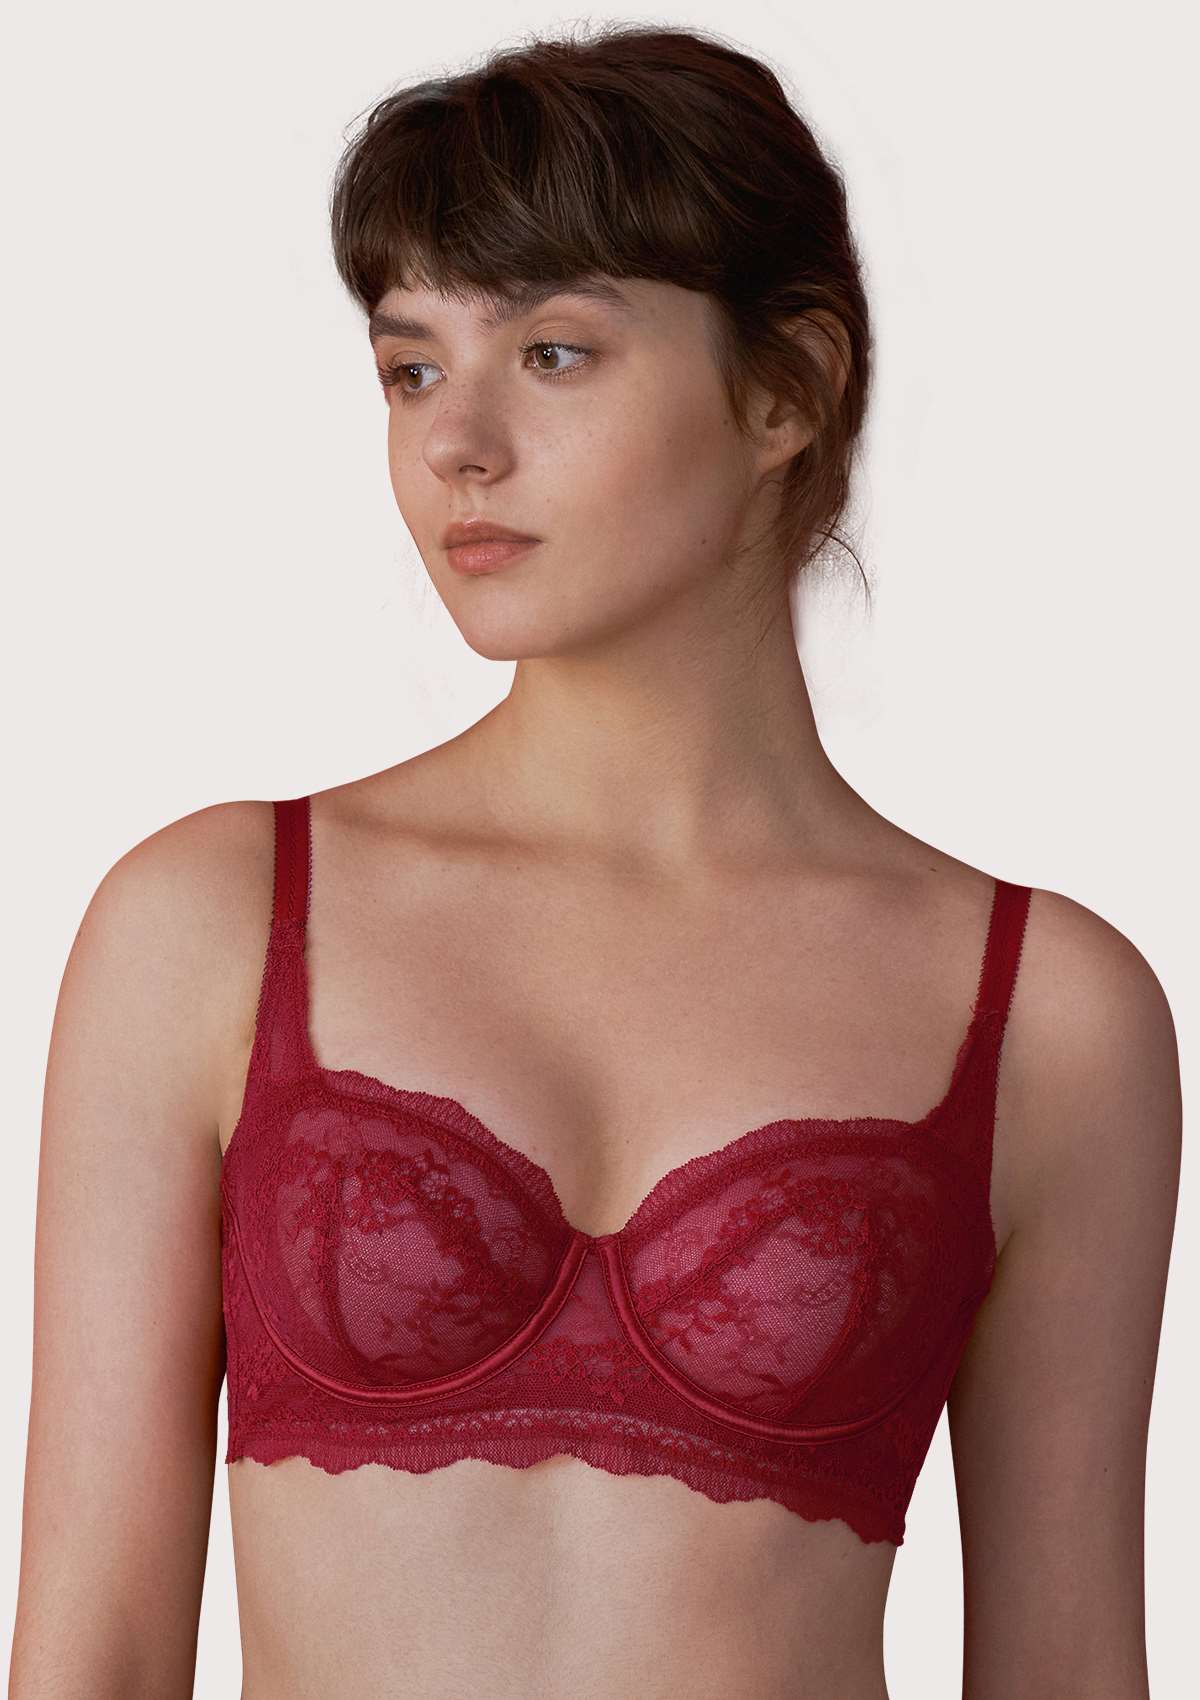 HSIA Floral Lace Unlined Bridal Balconette Bra Set - Supportive Classic - Burgundy / 36 / C